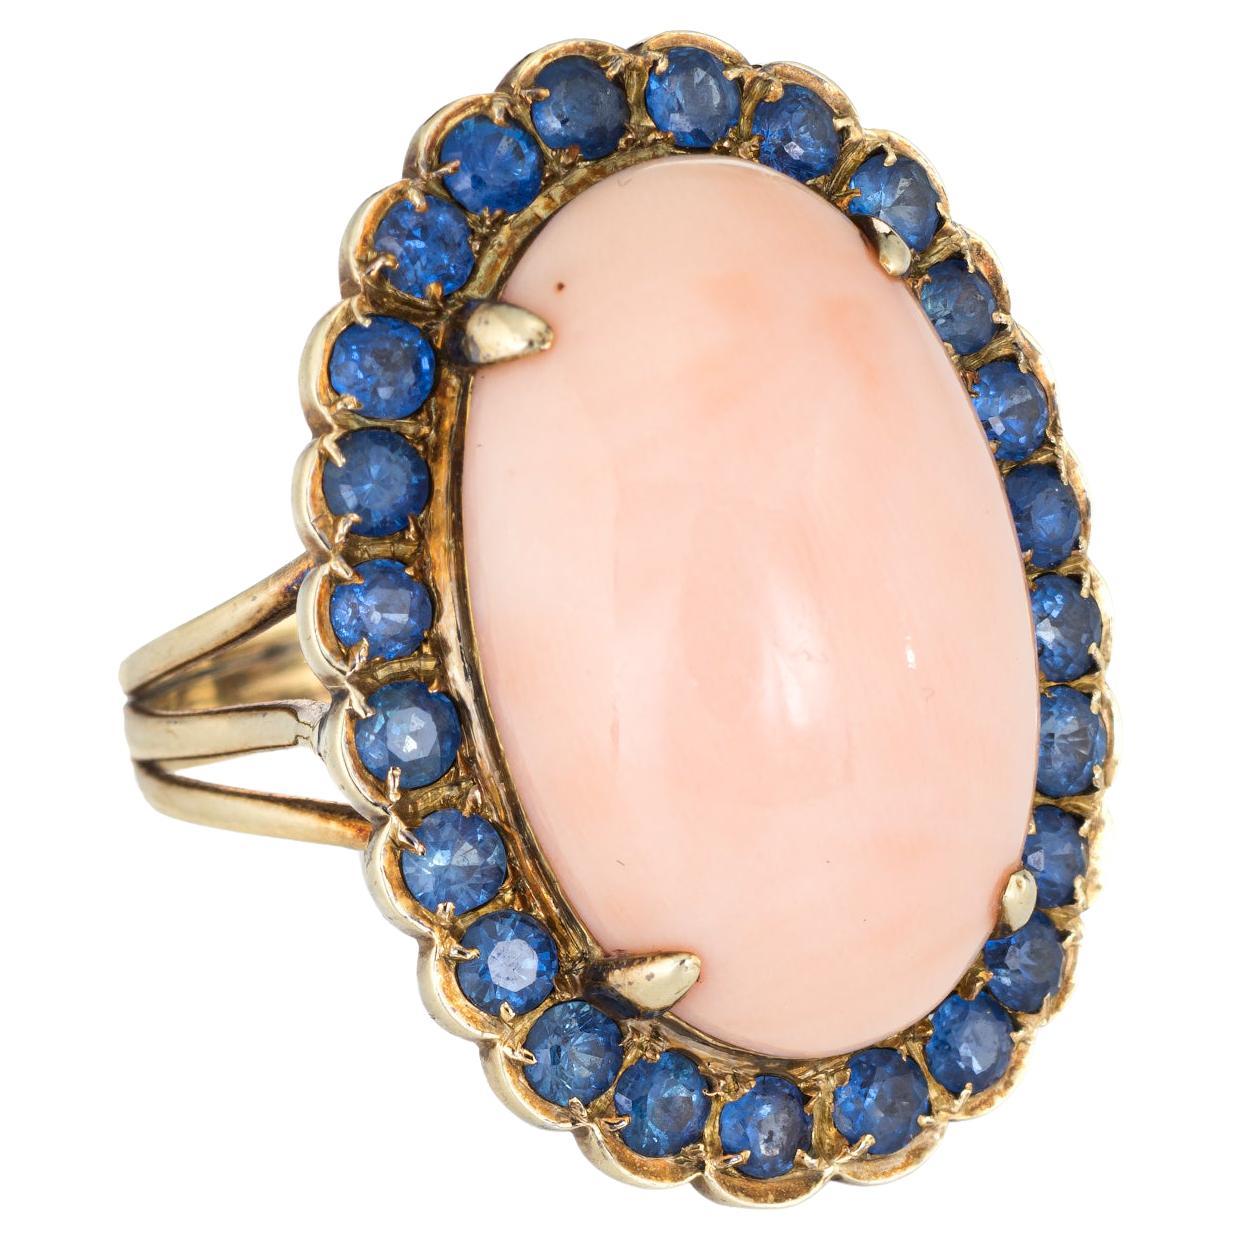 Angel Skin Coral Sapphire Ring Vintage 14k Yellow Gold Oval Cocktail Jewelry